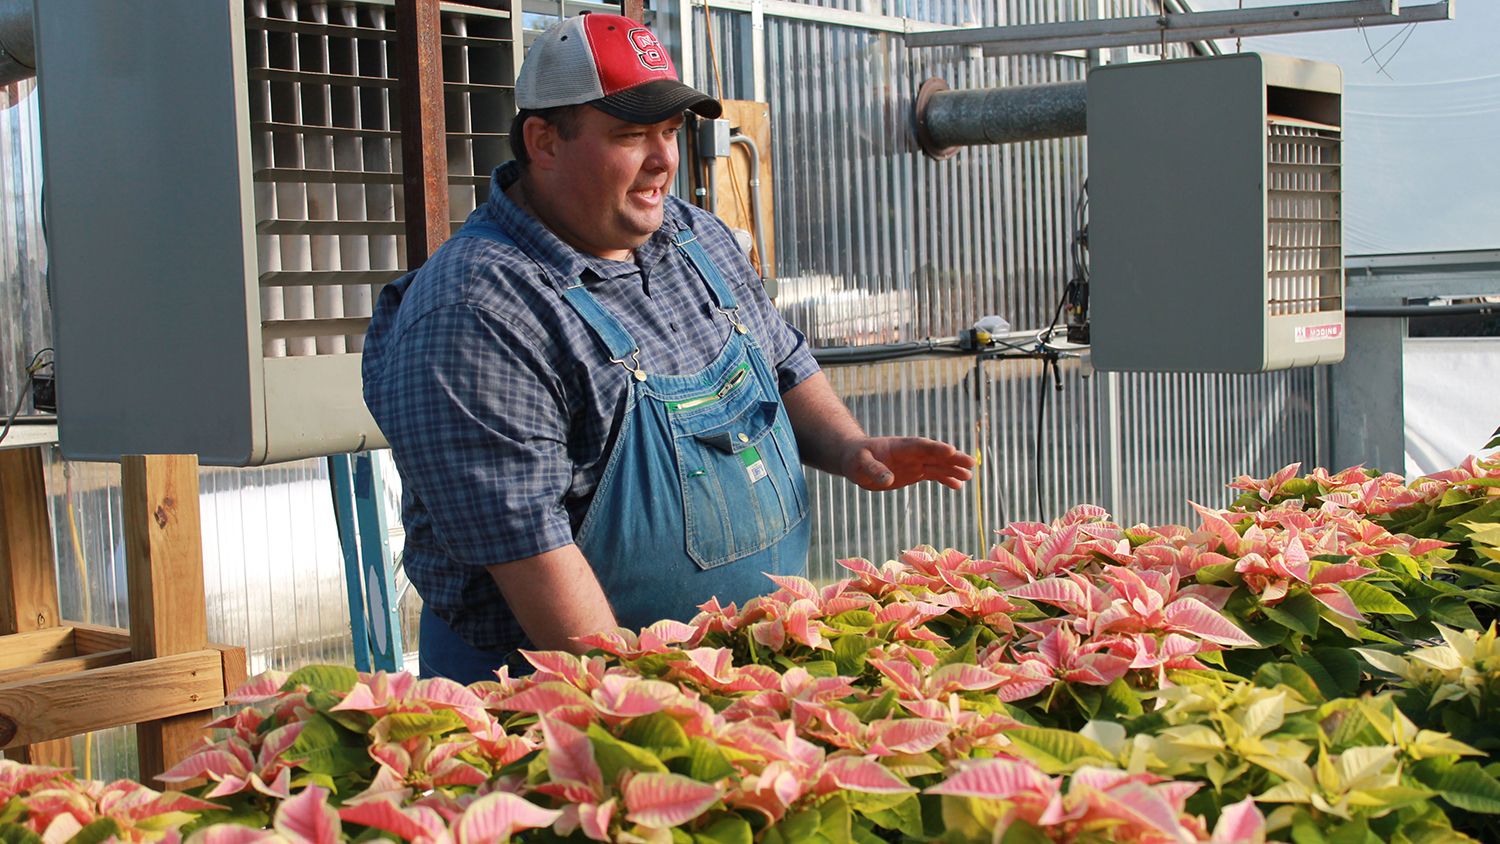 Farmer in overalls and cap discussing his poinsettias